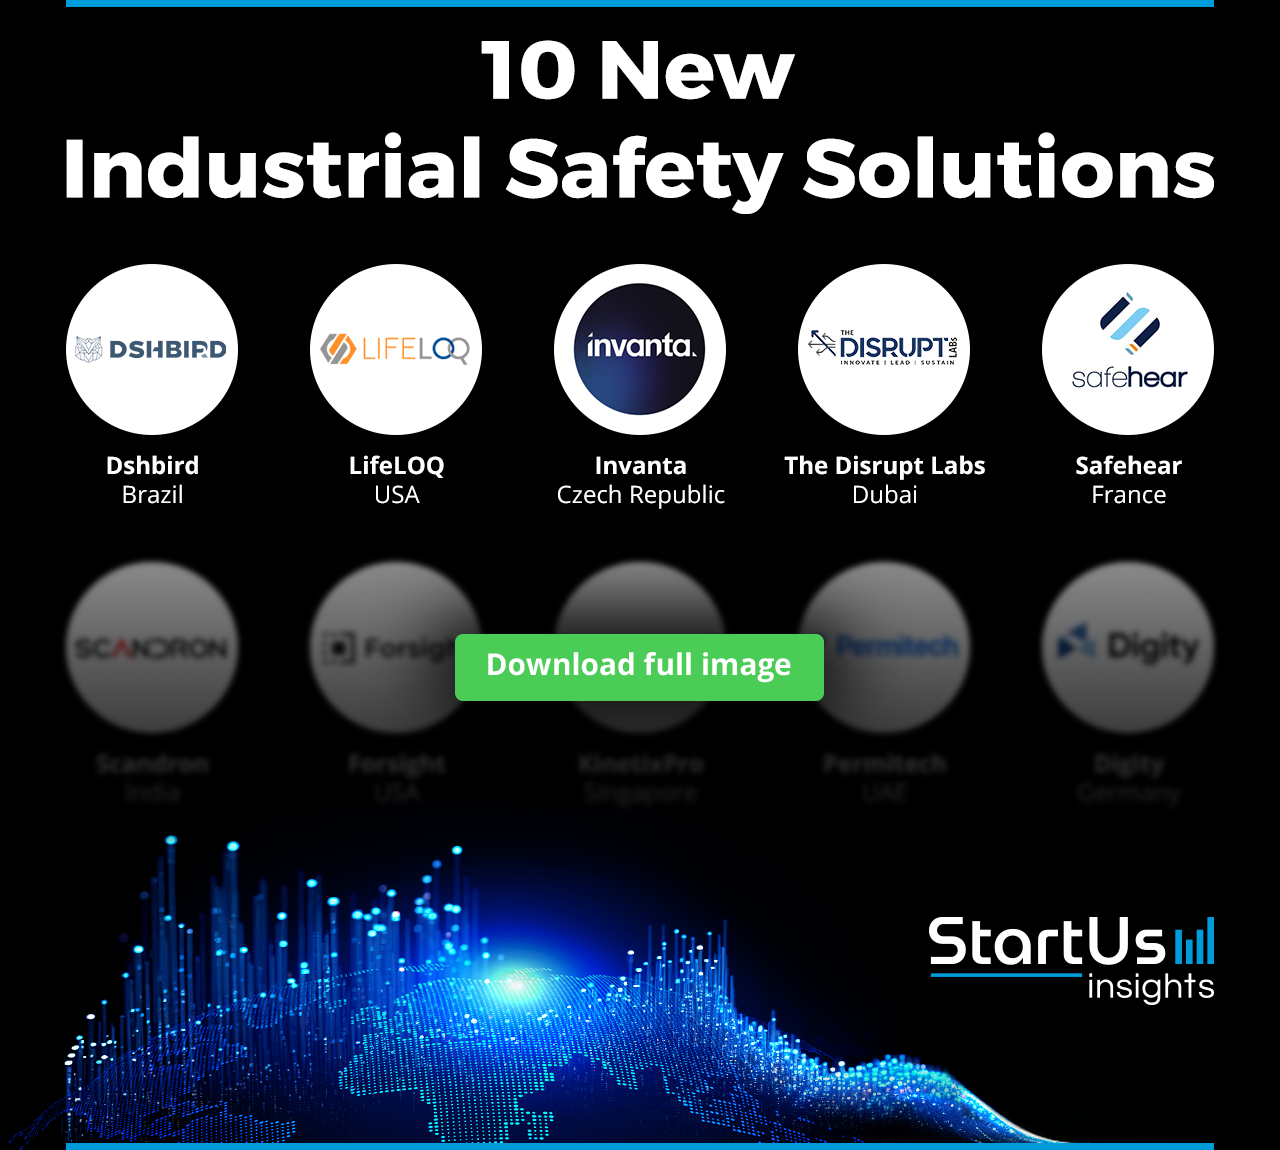 New-Industrial-Safety-Companies-Logos-Blurred-StartUs-Insights-noresize